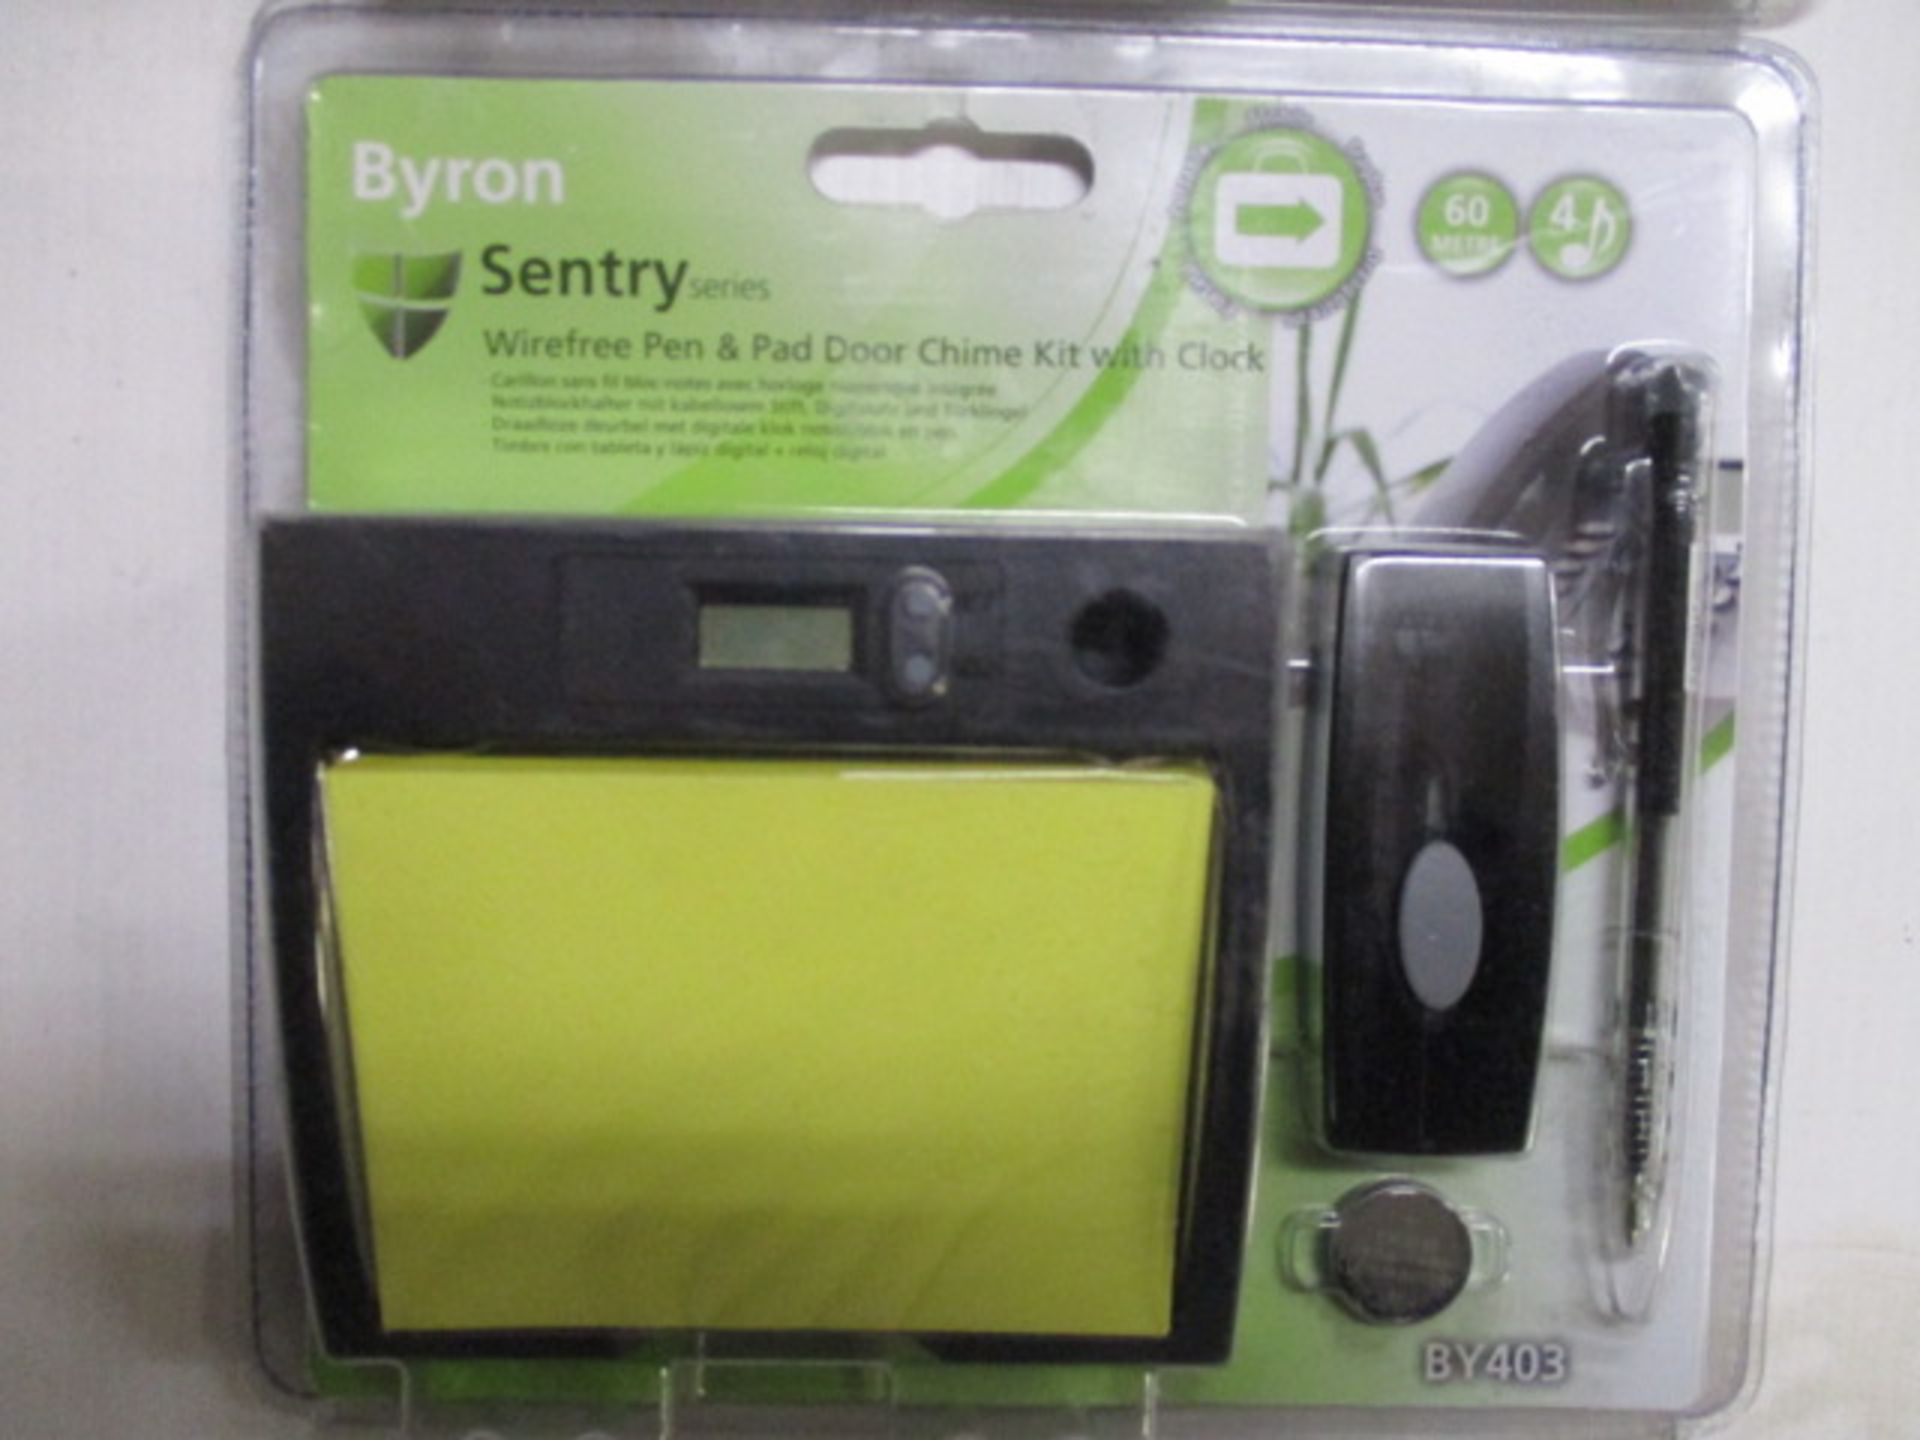 Byron semtry wirefree pen and pad door chime kit with clock brand new and package with battery 60m